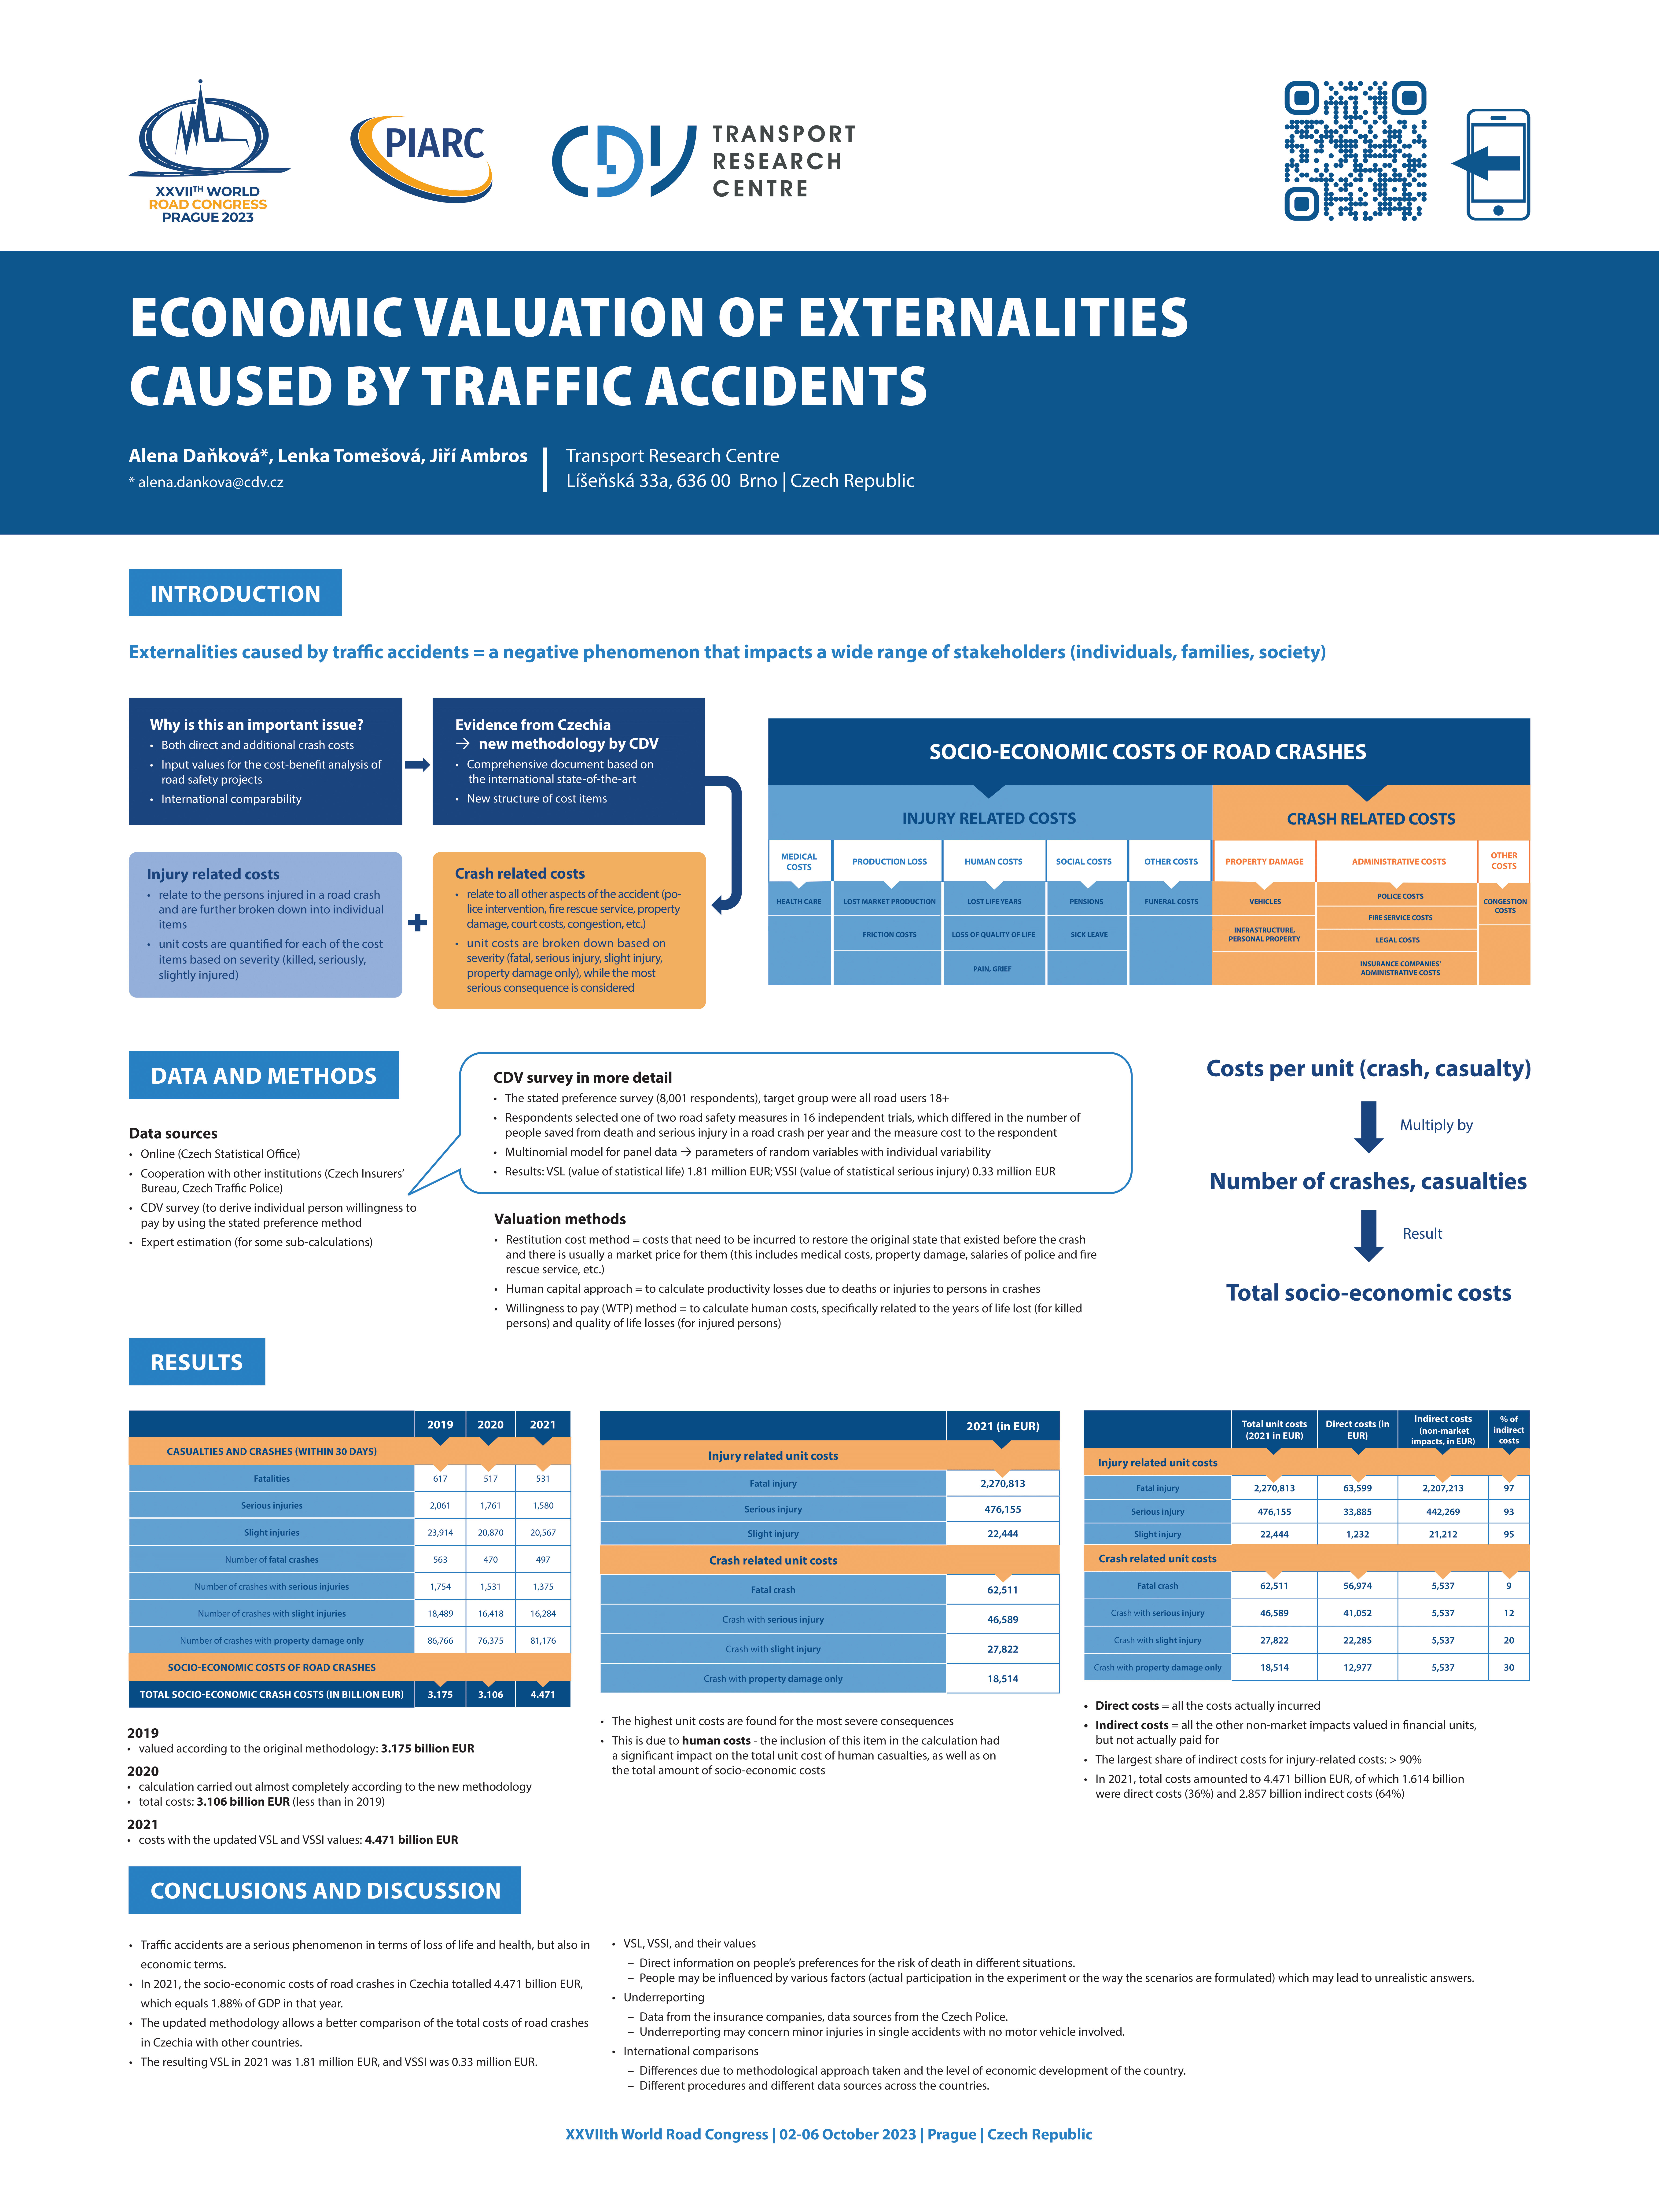 Economic Evaluation of Externalities Caused by Traffic Accidents (PIARC 2023)-poster